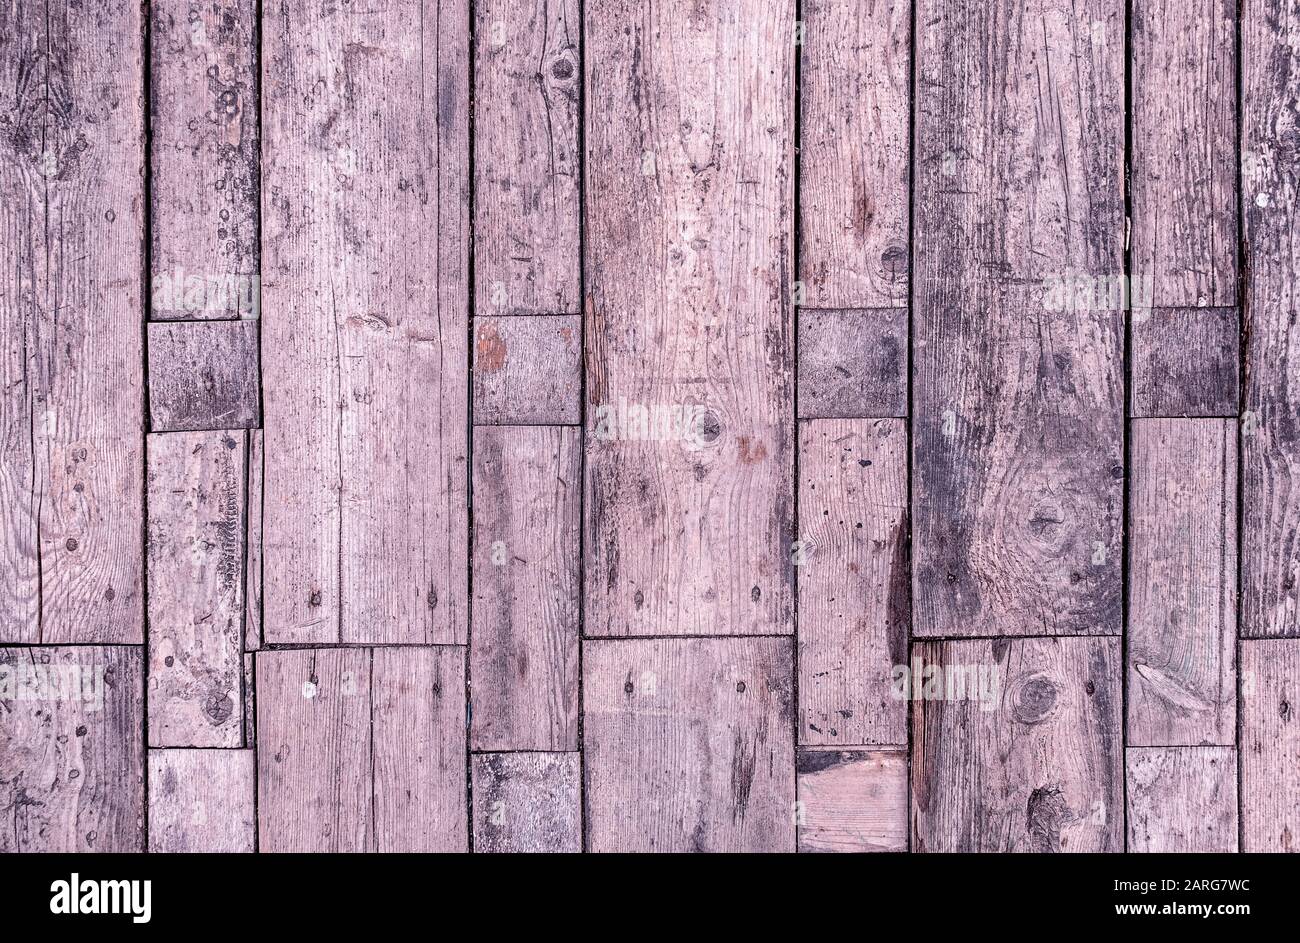 Old and worn wood texture background Stock Photo